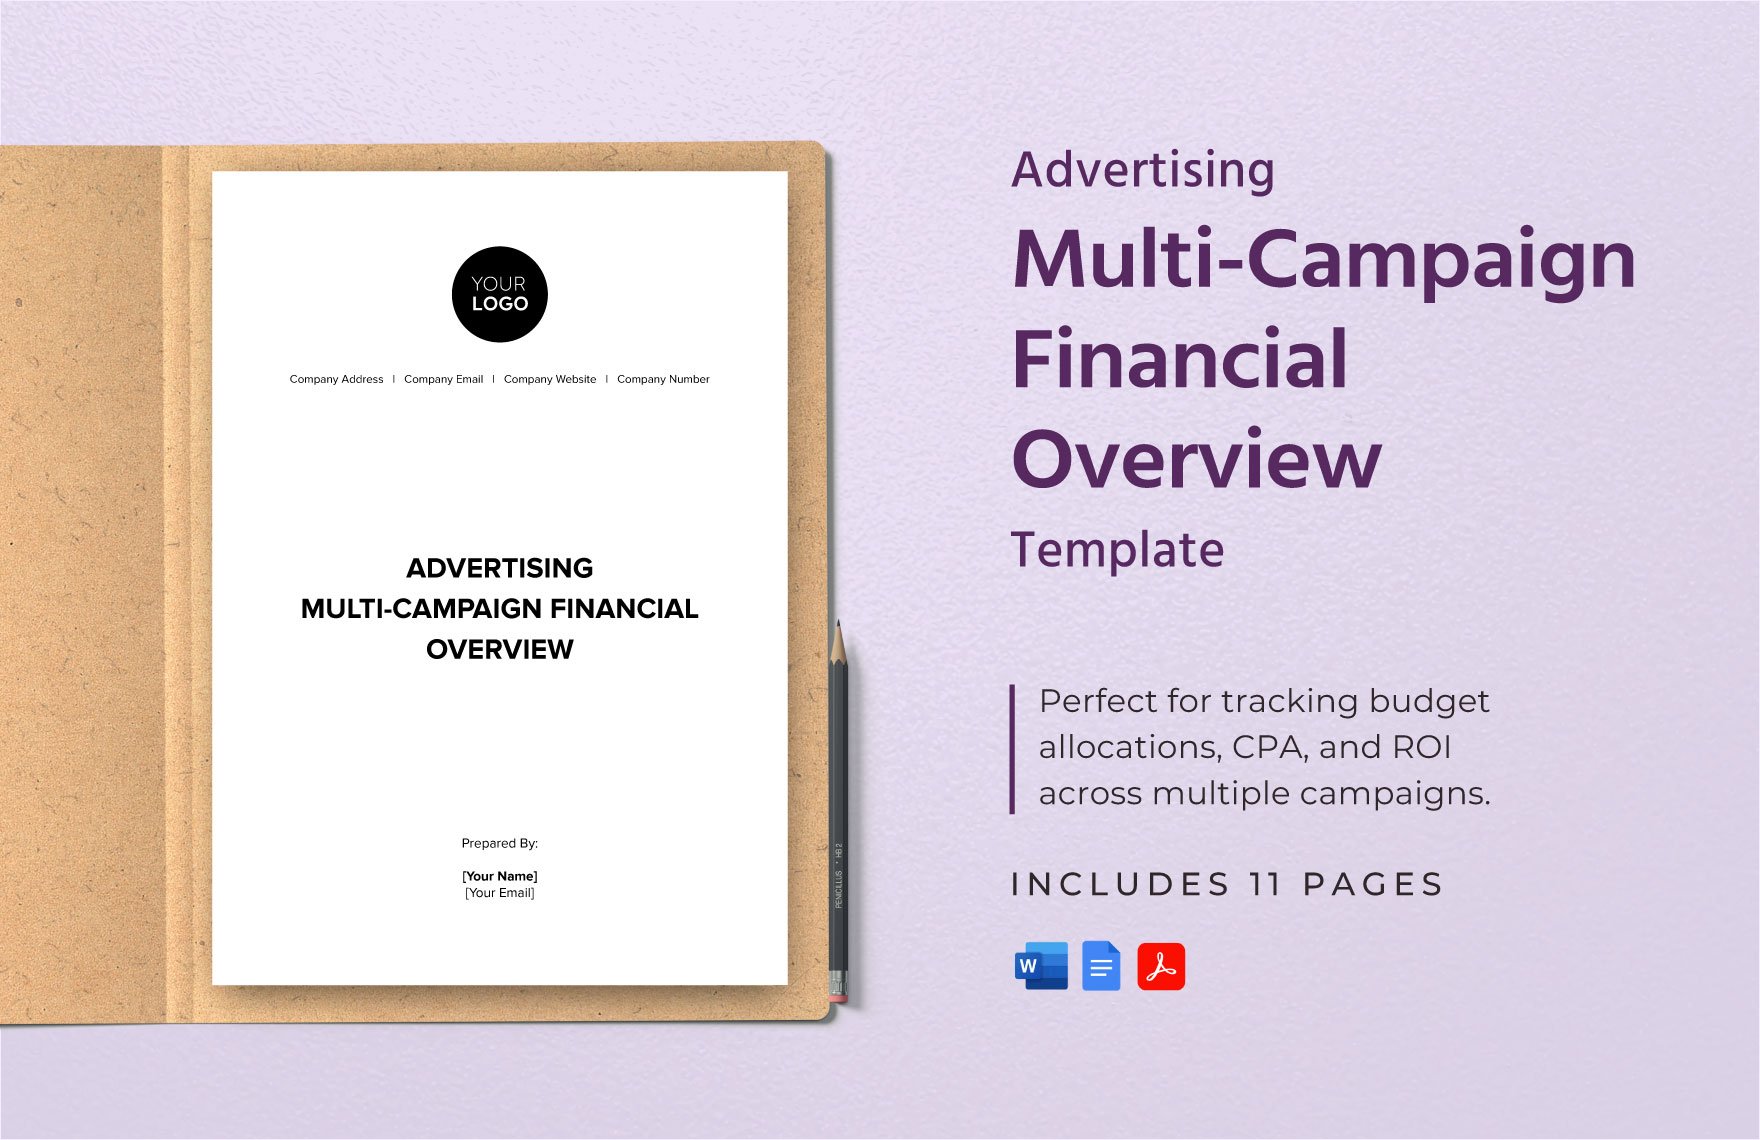 Advertising Multi-Campaign Financial Overview Template